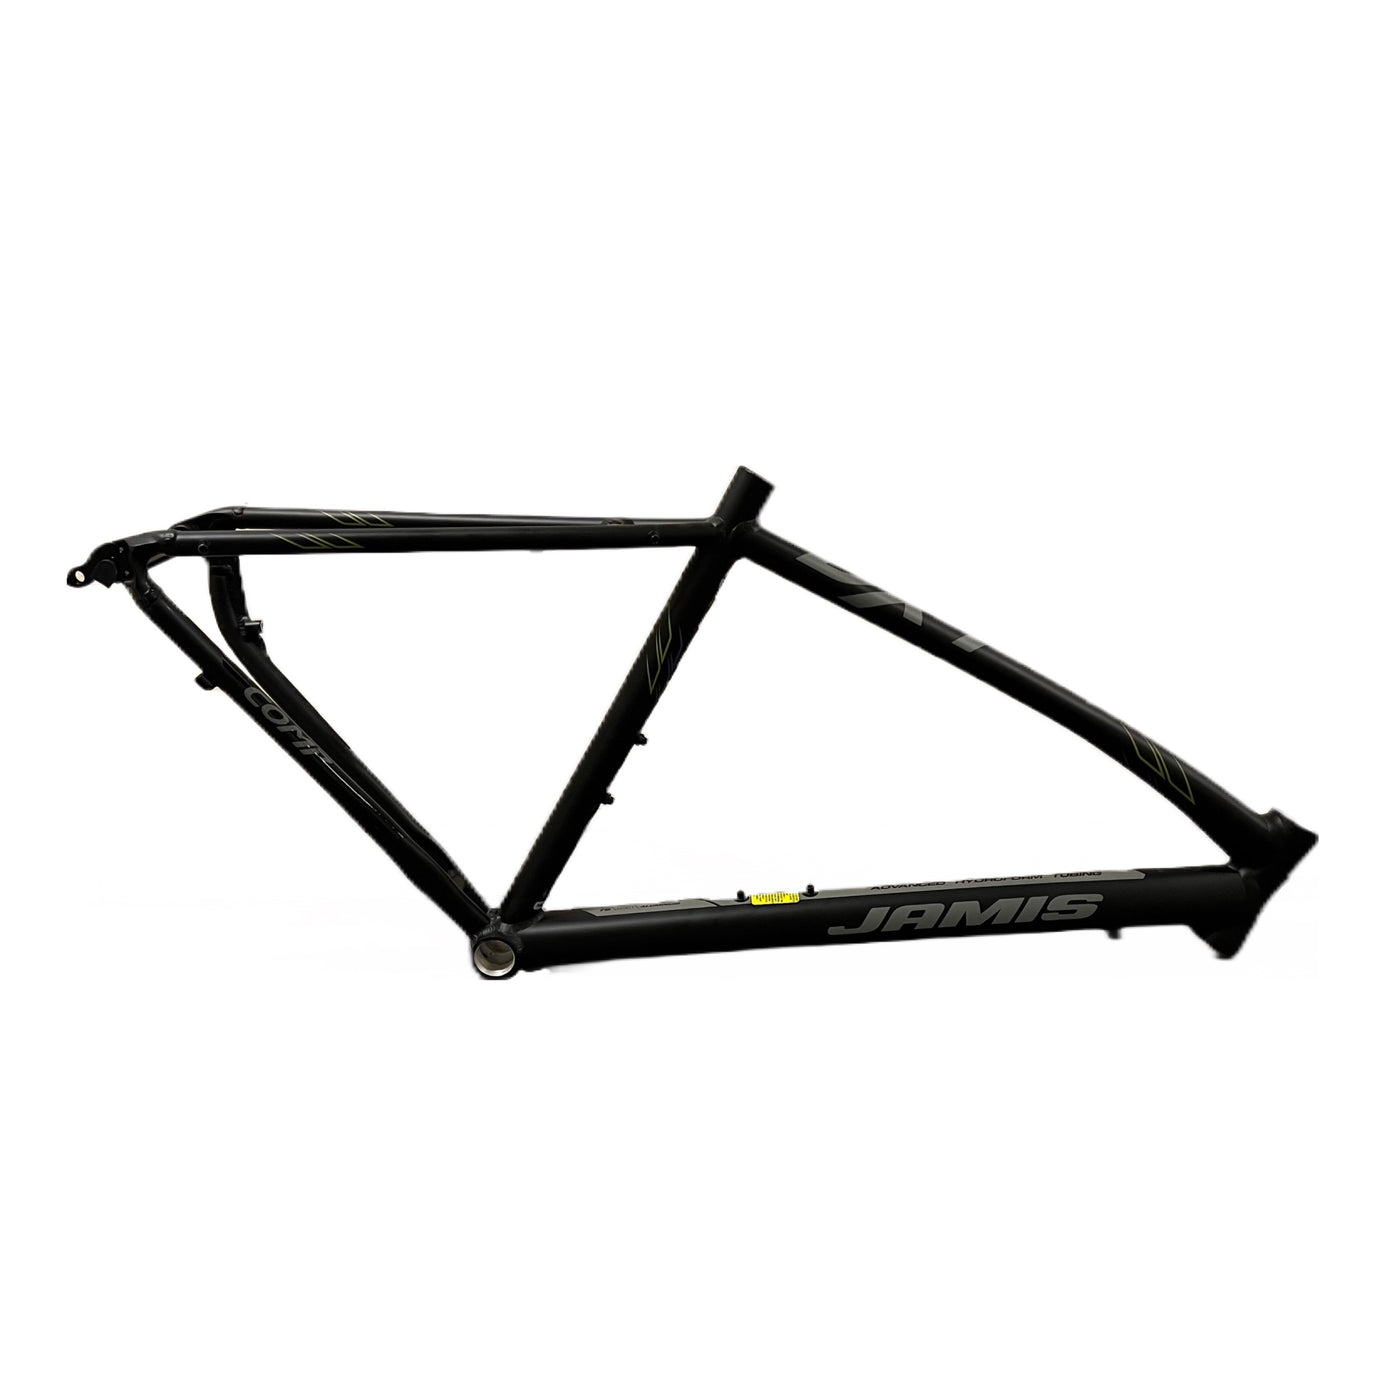 Jamis DXT COMP MTB Frame | Size 19in